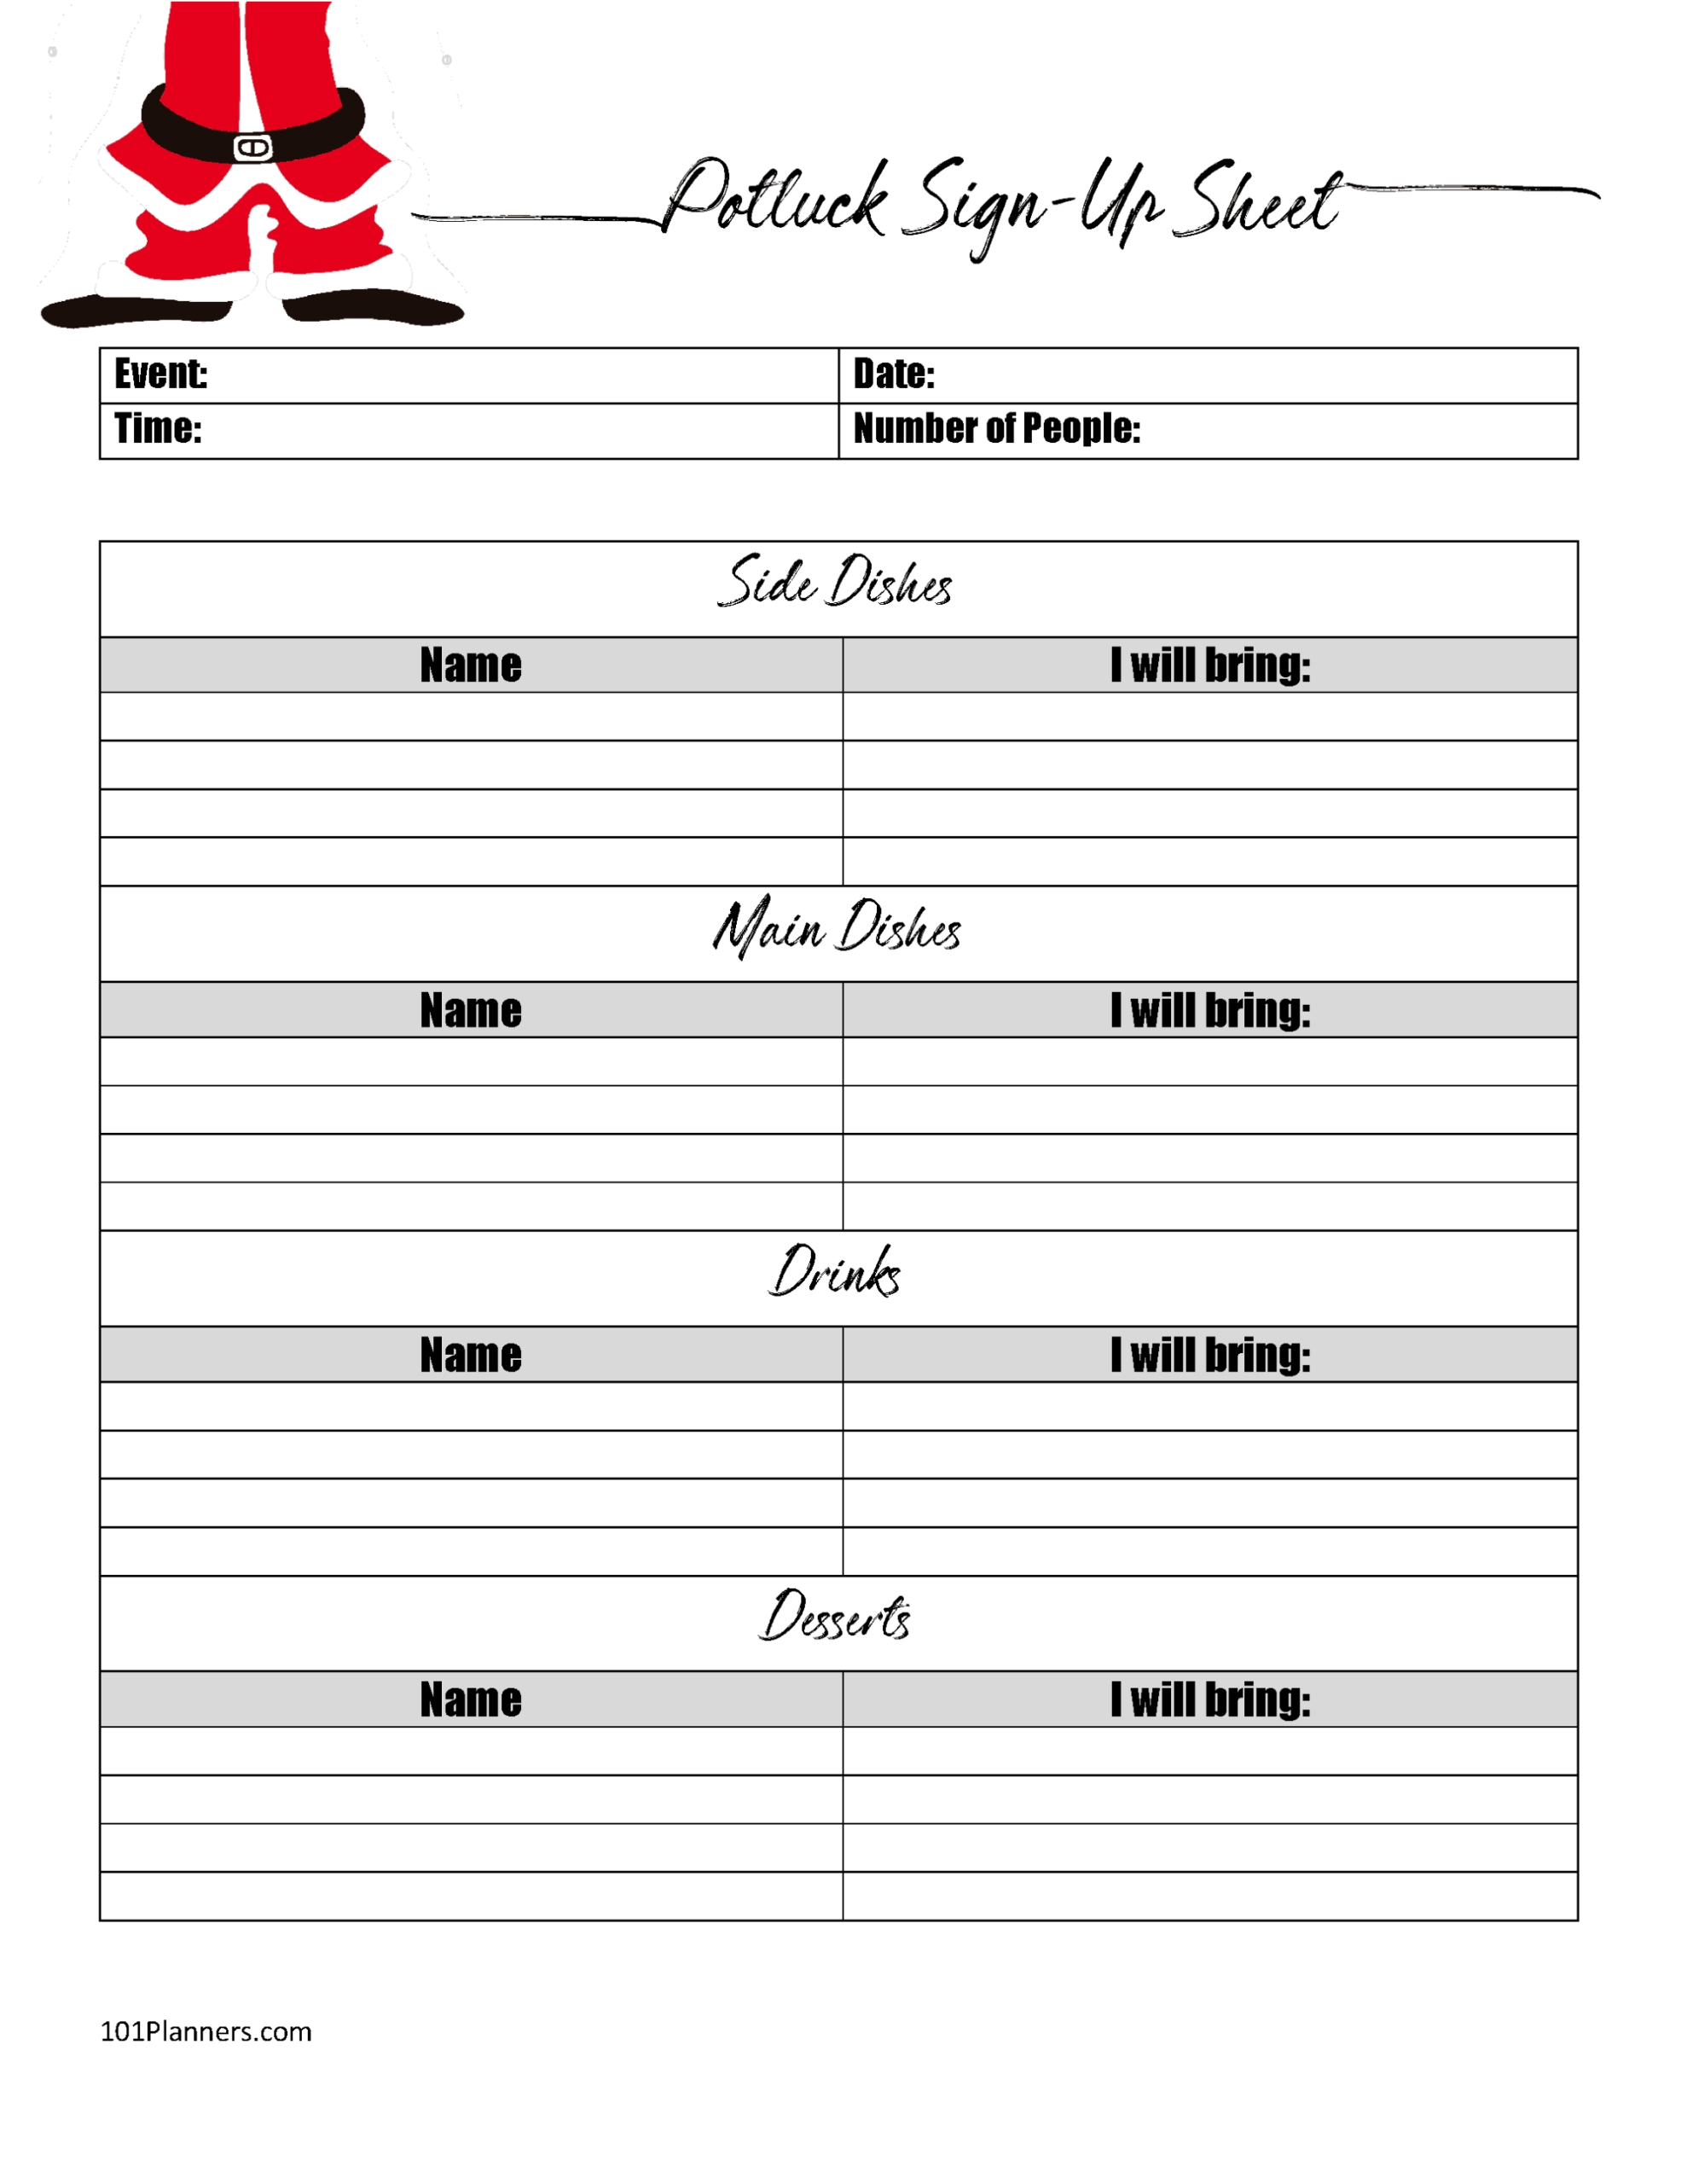 Free Printable Potluck Sign Up Sheet | Editable | Instant Download within Potluck Signup Sheet Template Word